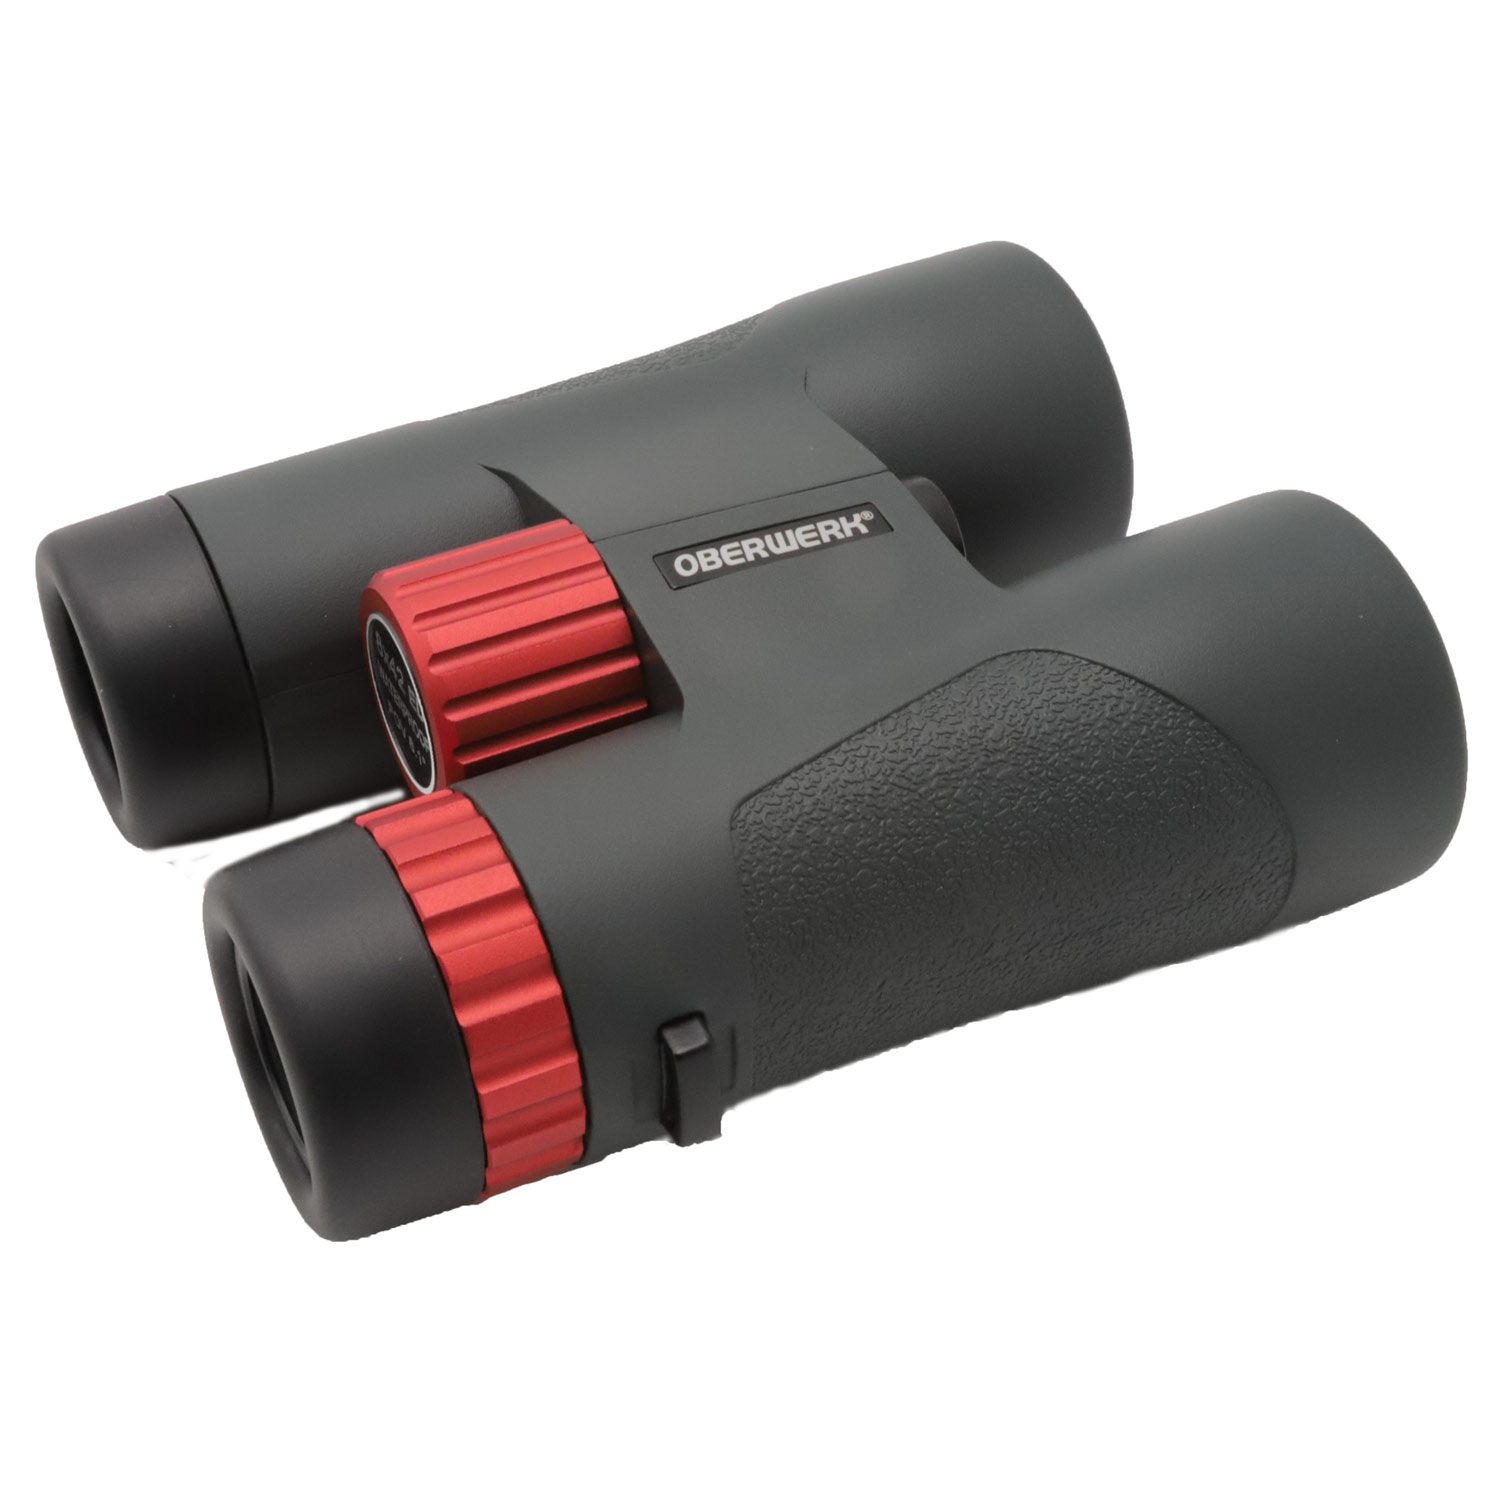 oblique view of a pair of roof prism binoculars with red highlights and "Oberwerk" brand name.